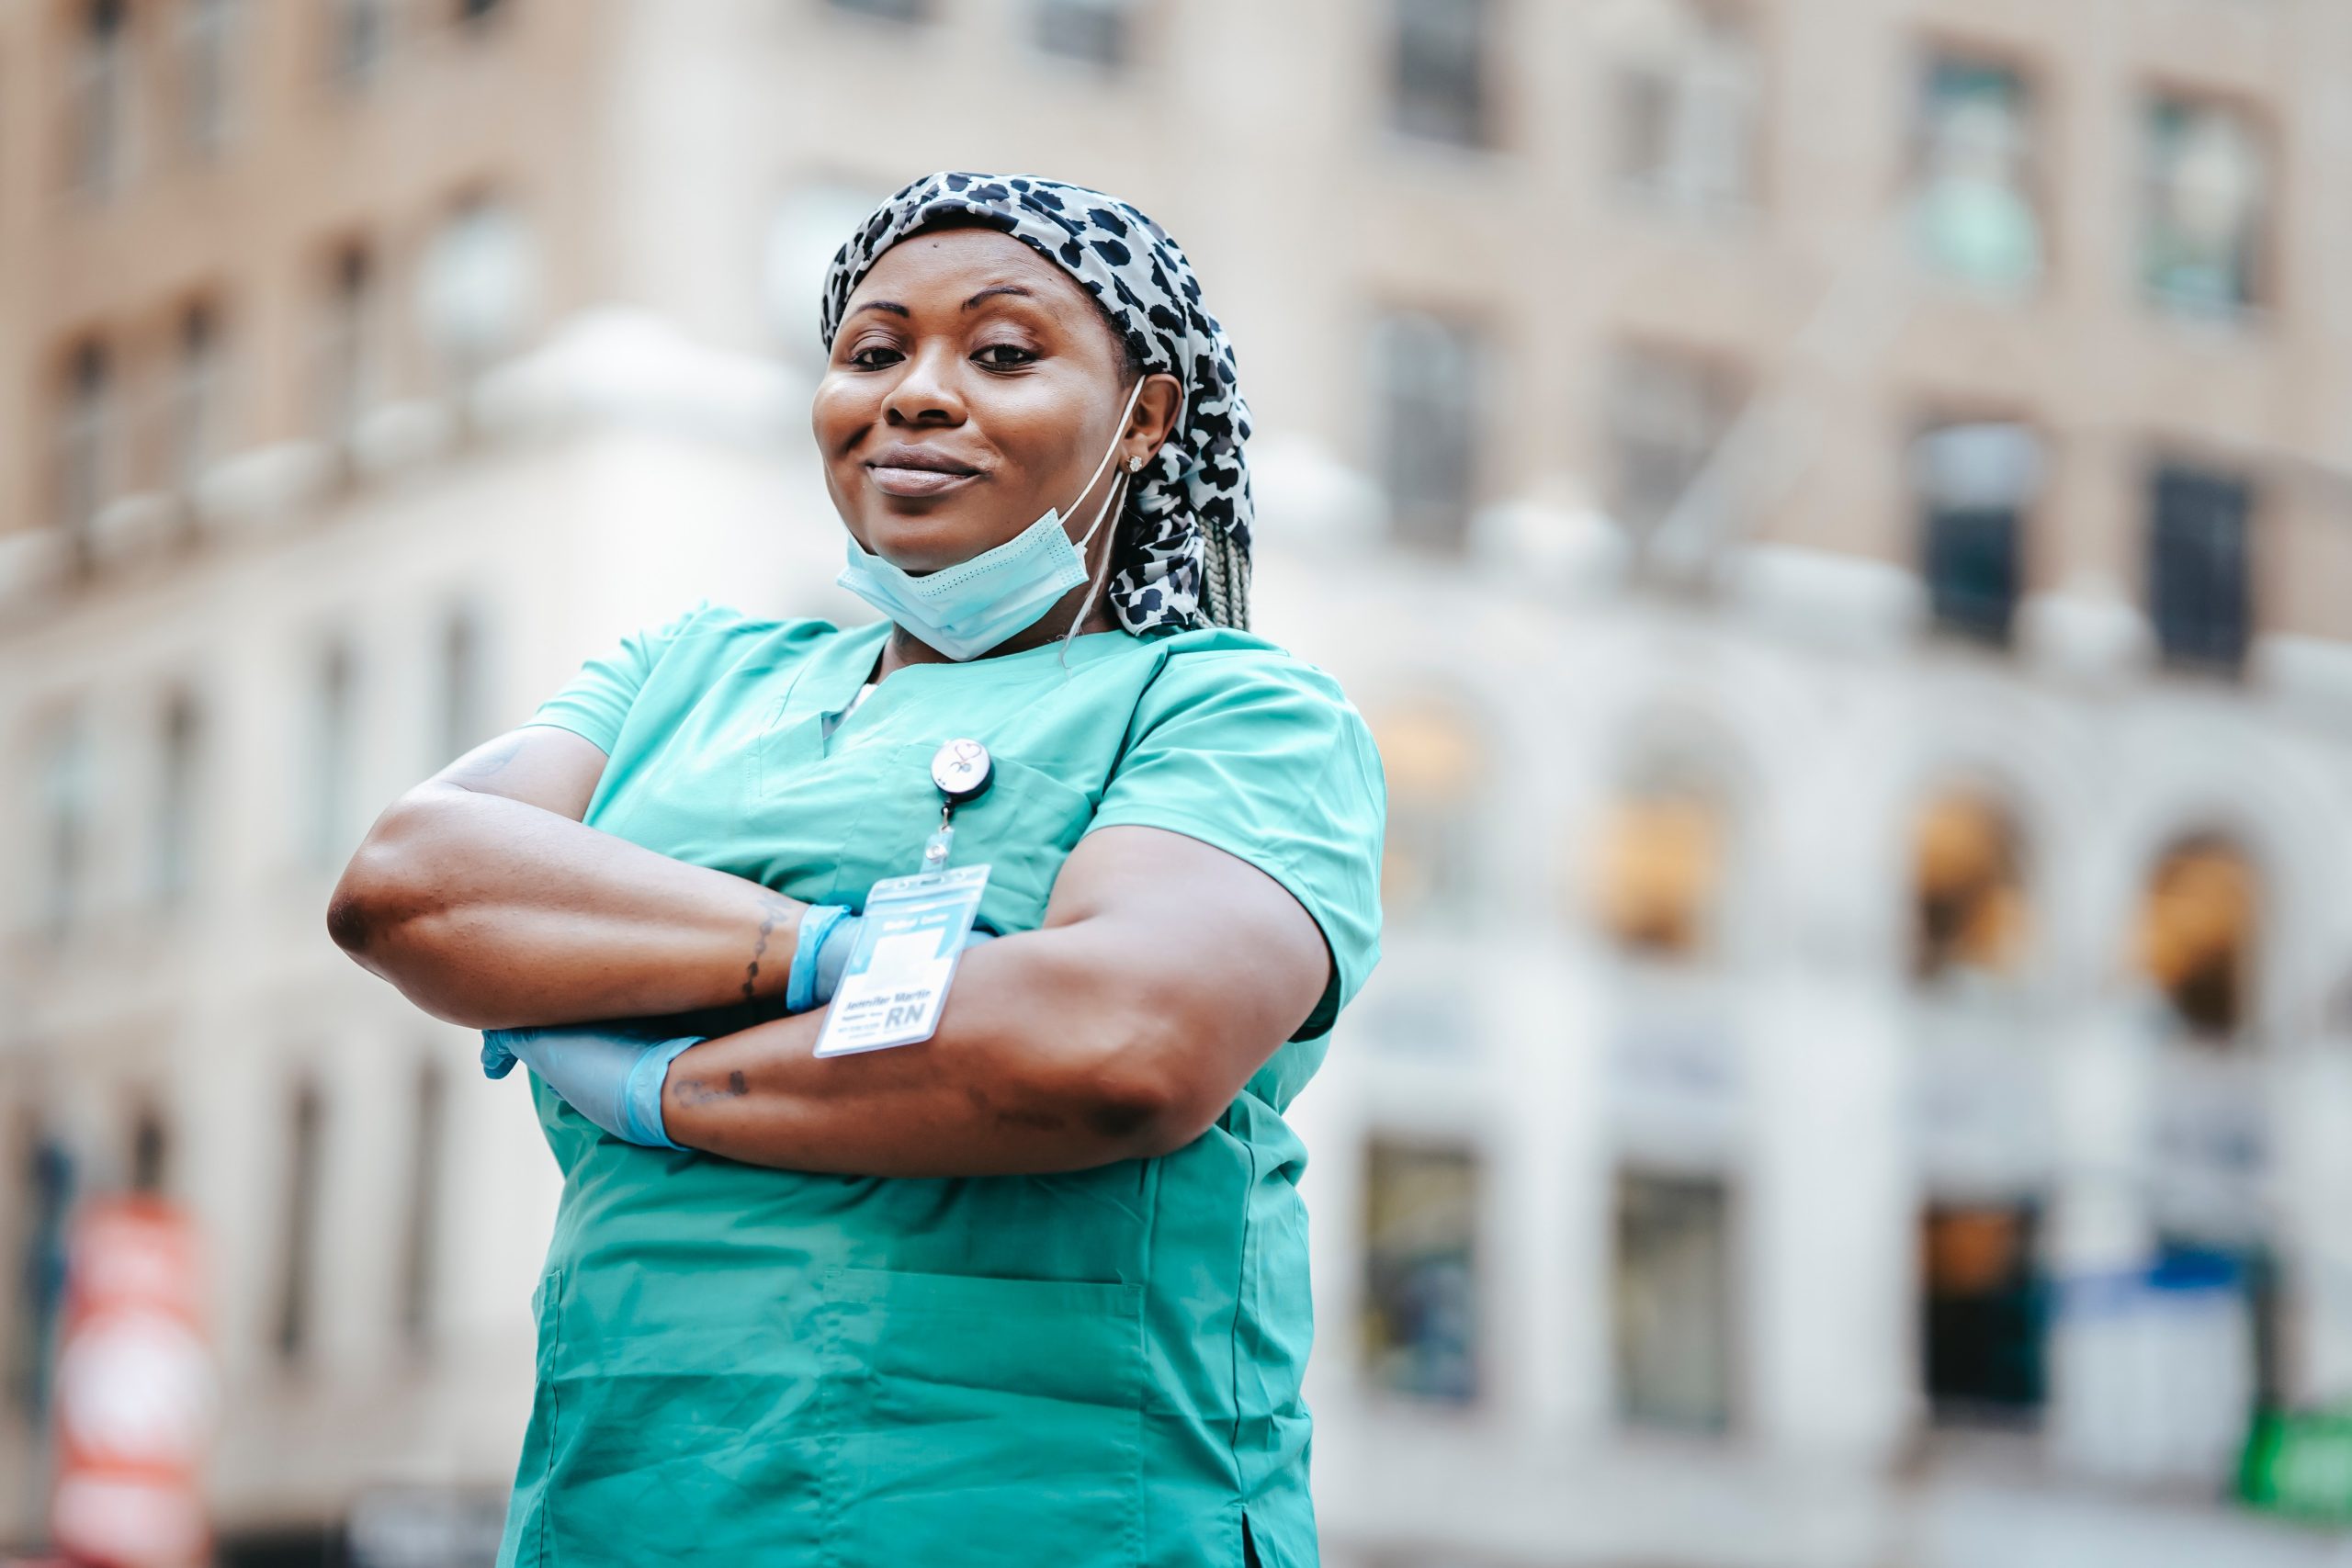 HOW SHE MOVED FROM NIGERIA 🇳🇬 TO IRELAND 🇮🇪 AS A NURSE IN A SHORT TIME